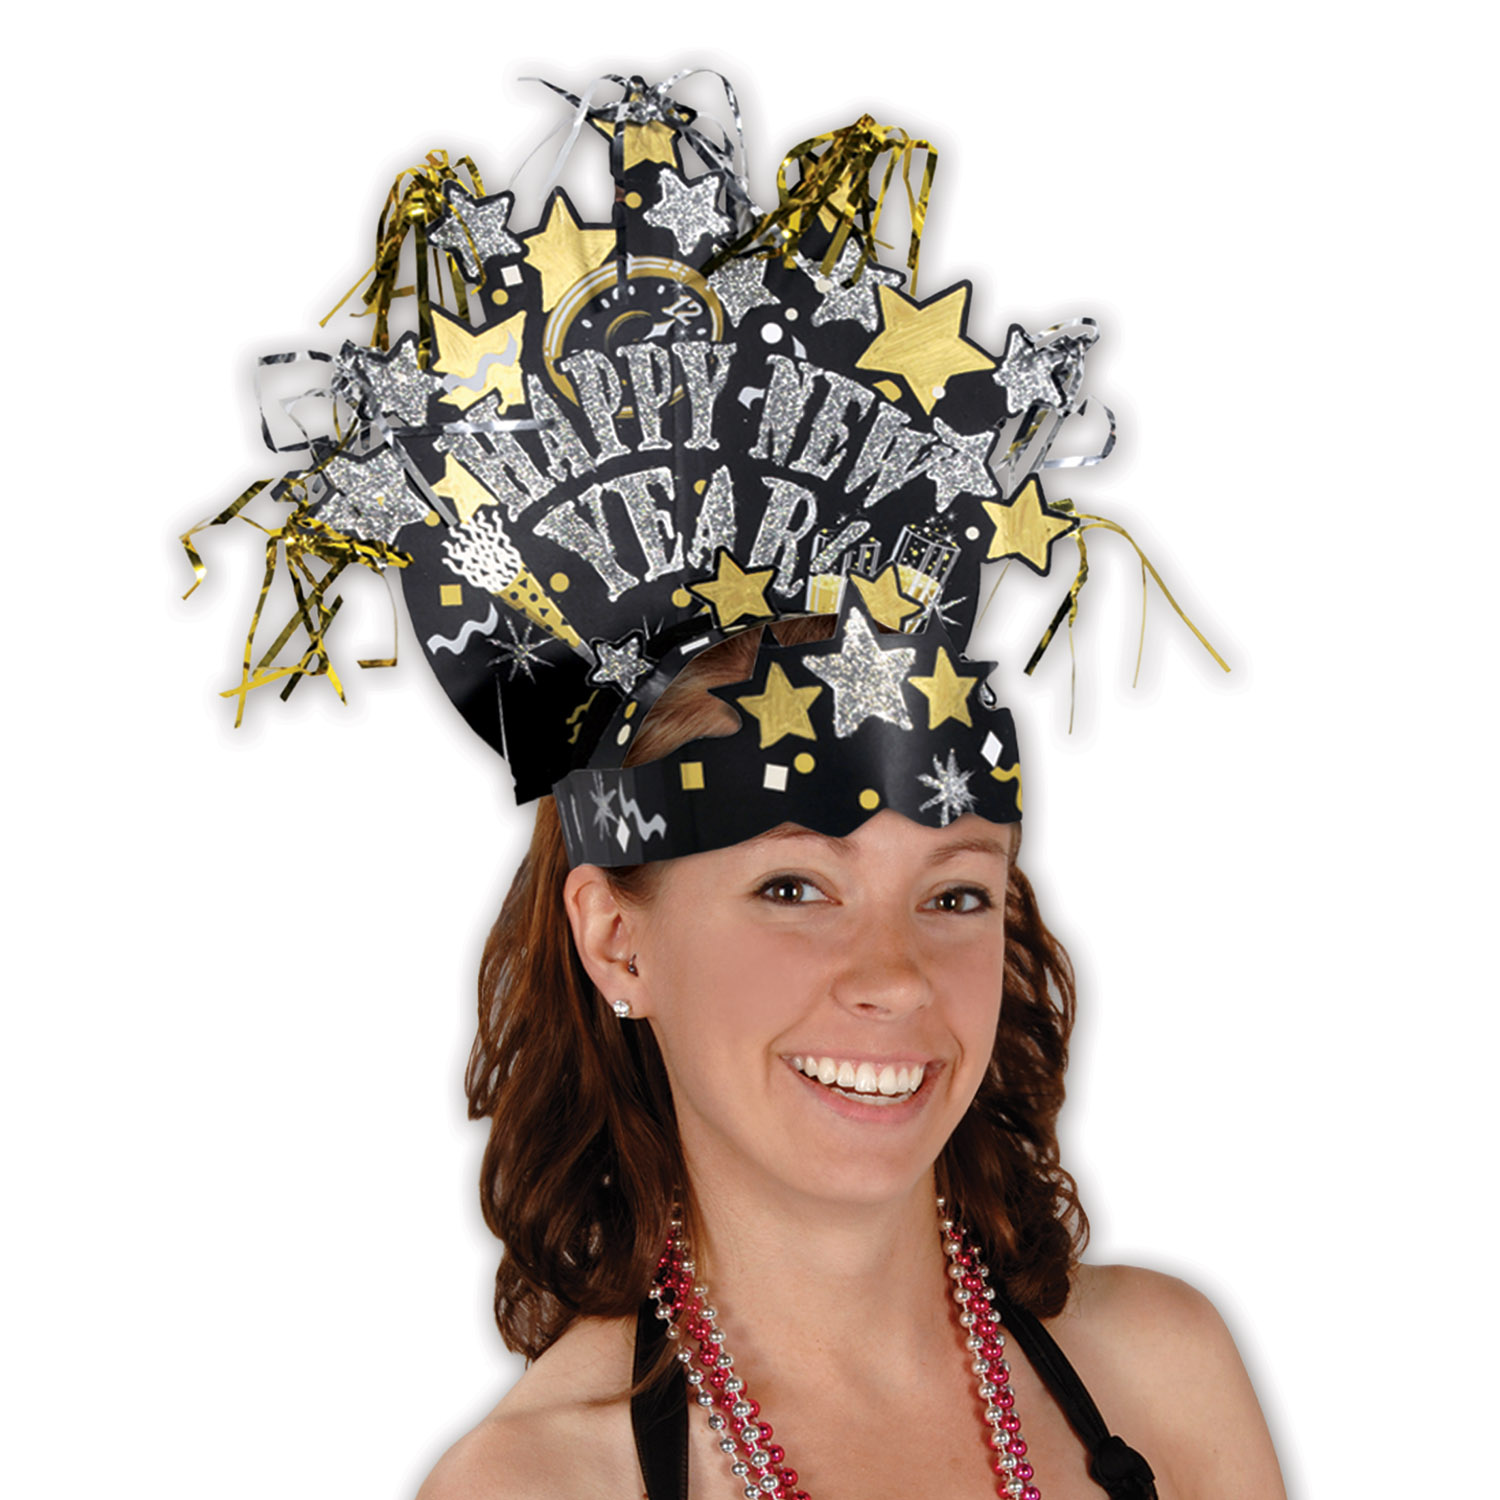 12 Pieces of Glittered New Year Headdress